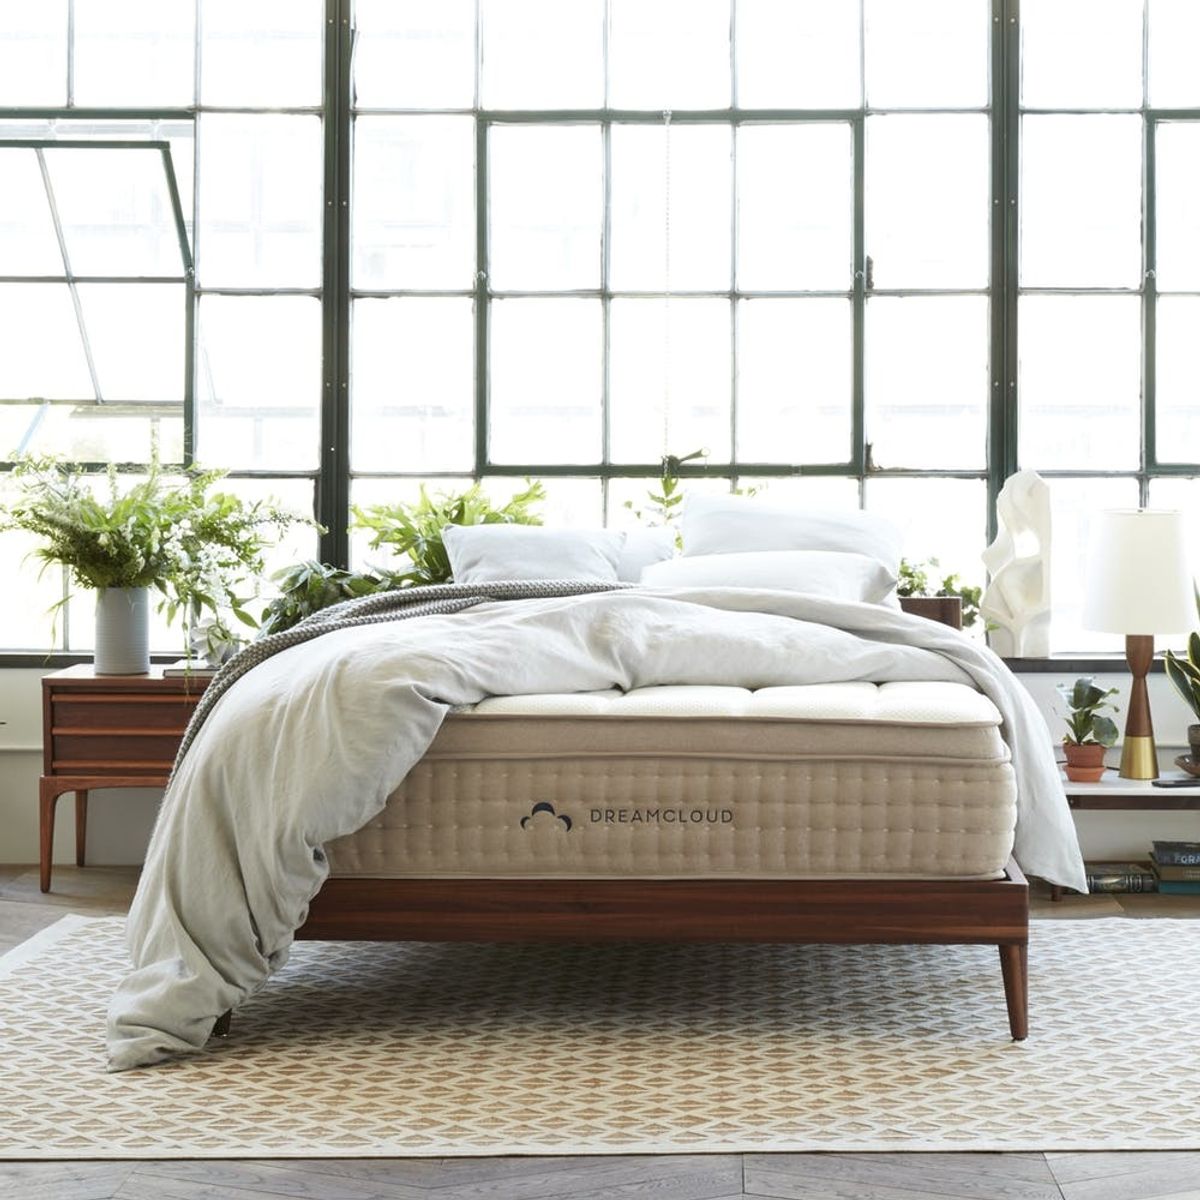 5 Hybrid Mattresses That Are *Not* Your Average Bed in a Box